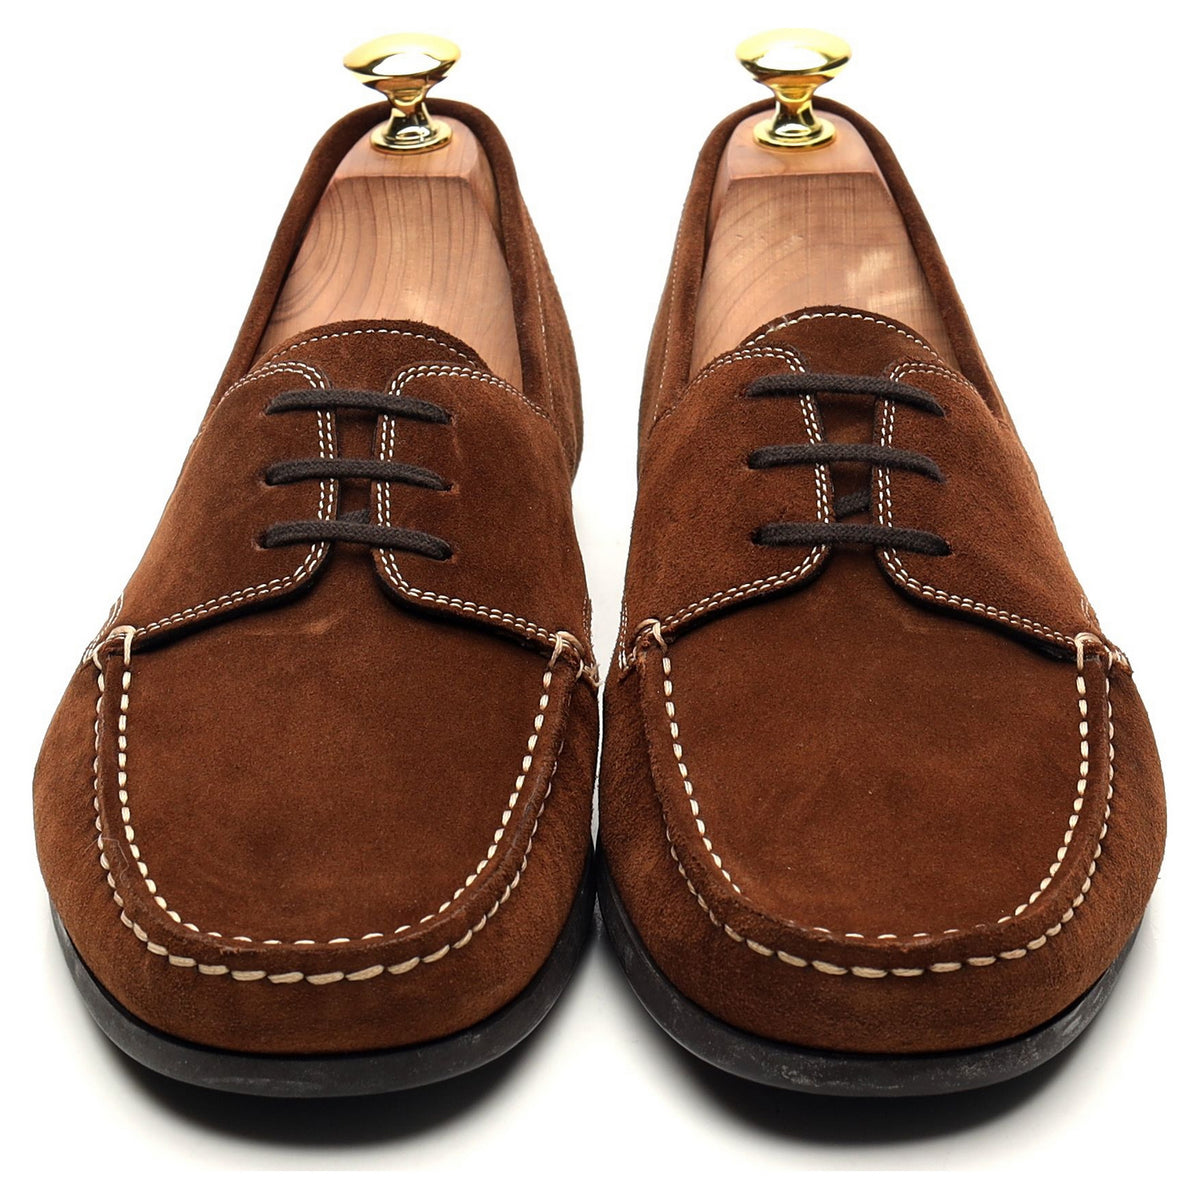 Brown Suede Boat Shoes UK 9